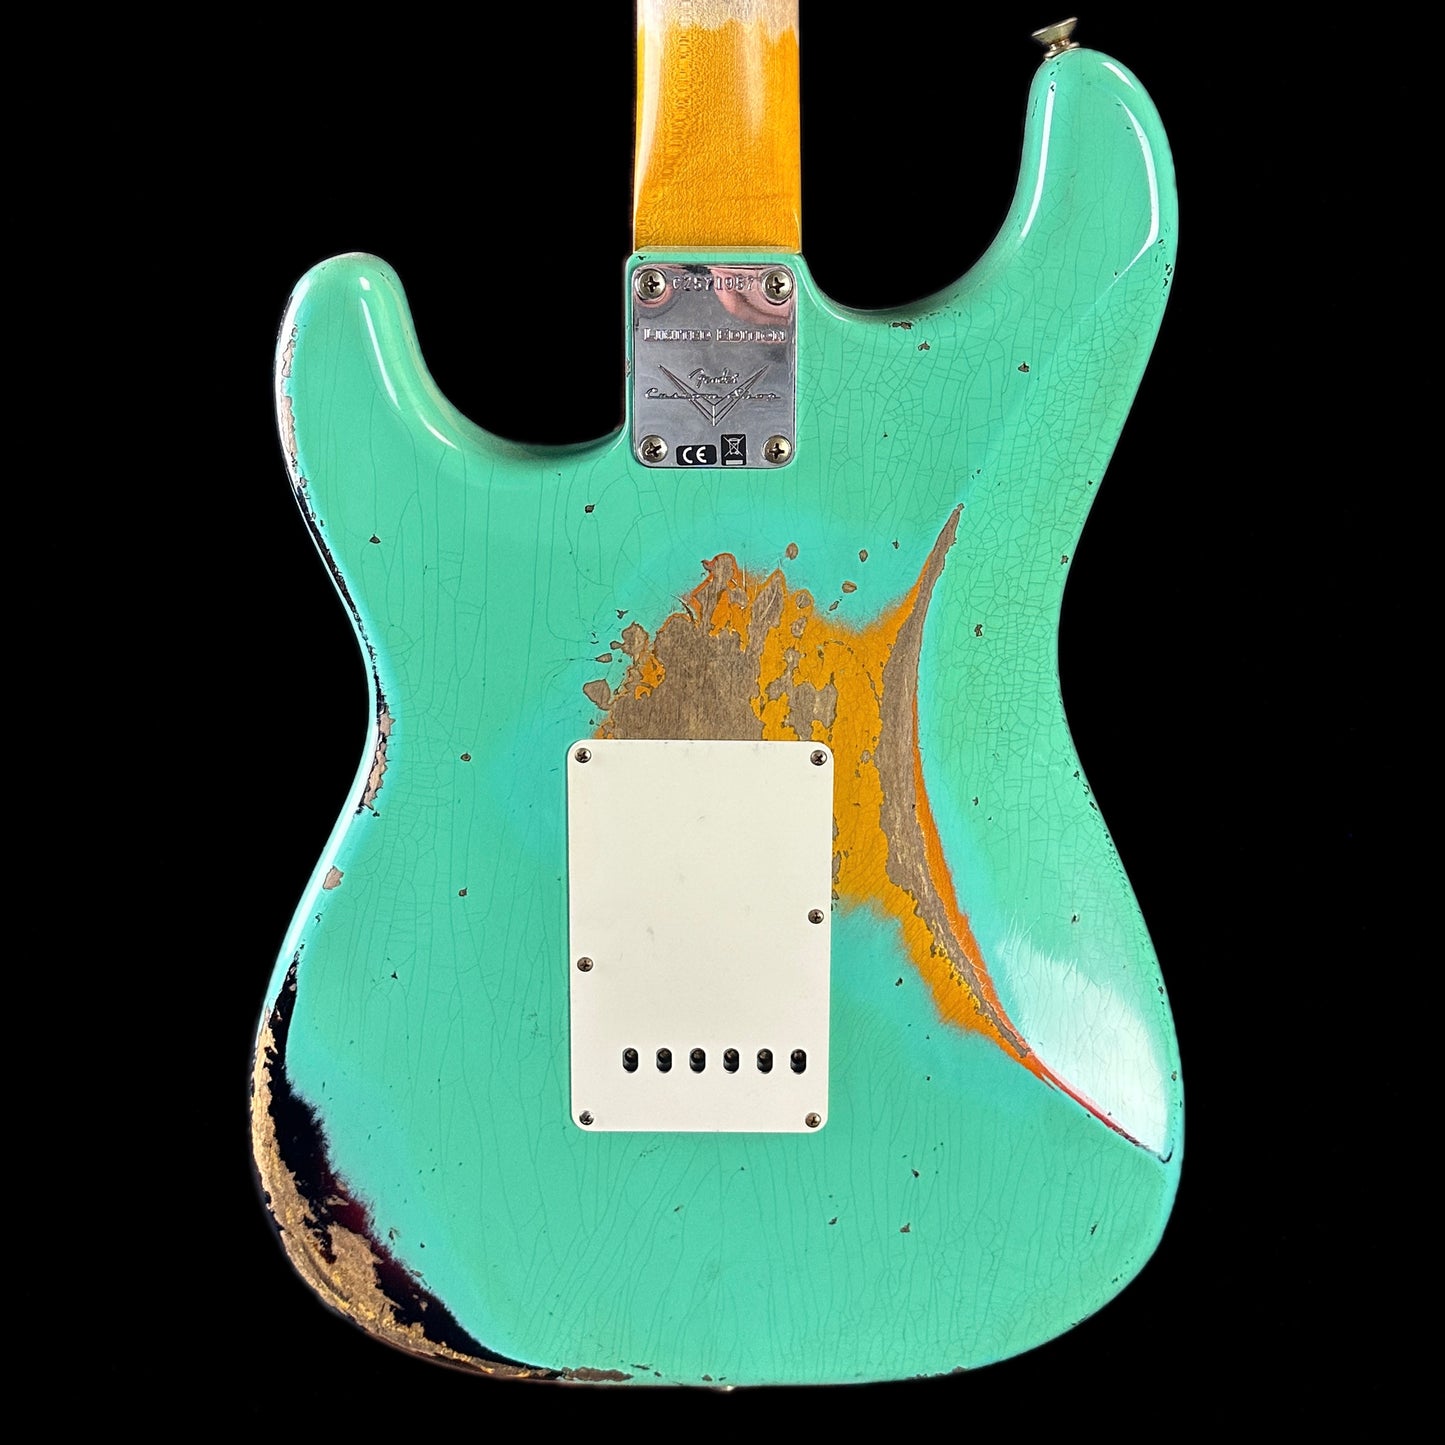 Back of body of Fender Custom Shop Limited Edition '62 Strat Heavy Relic Faded Aged Sea Foam Green Over 3 Color Sunburst.